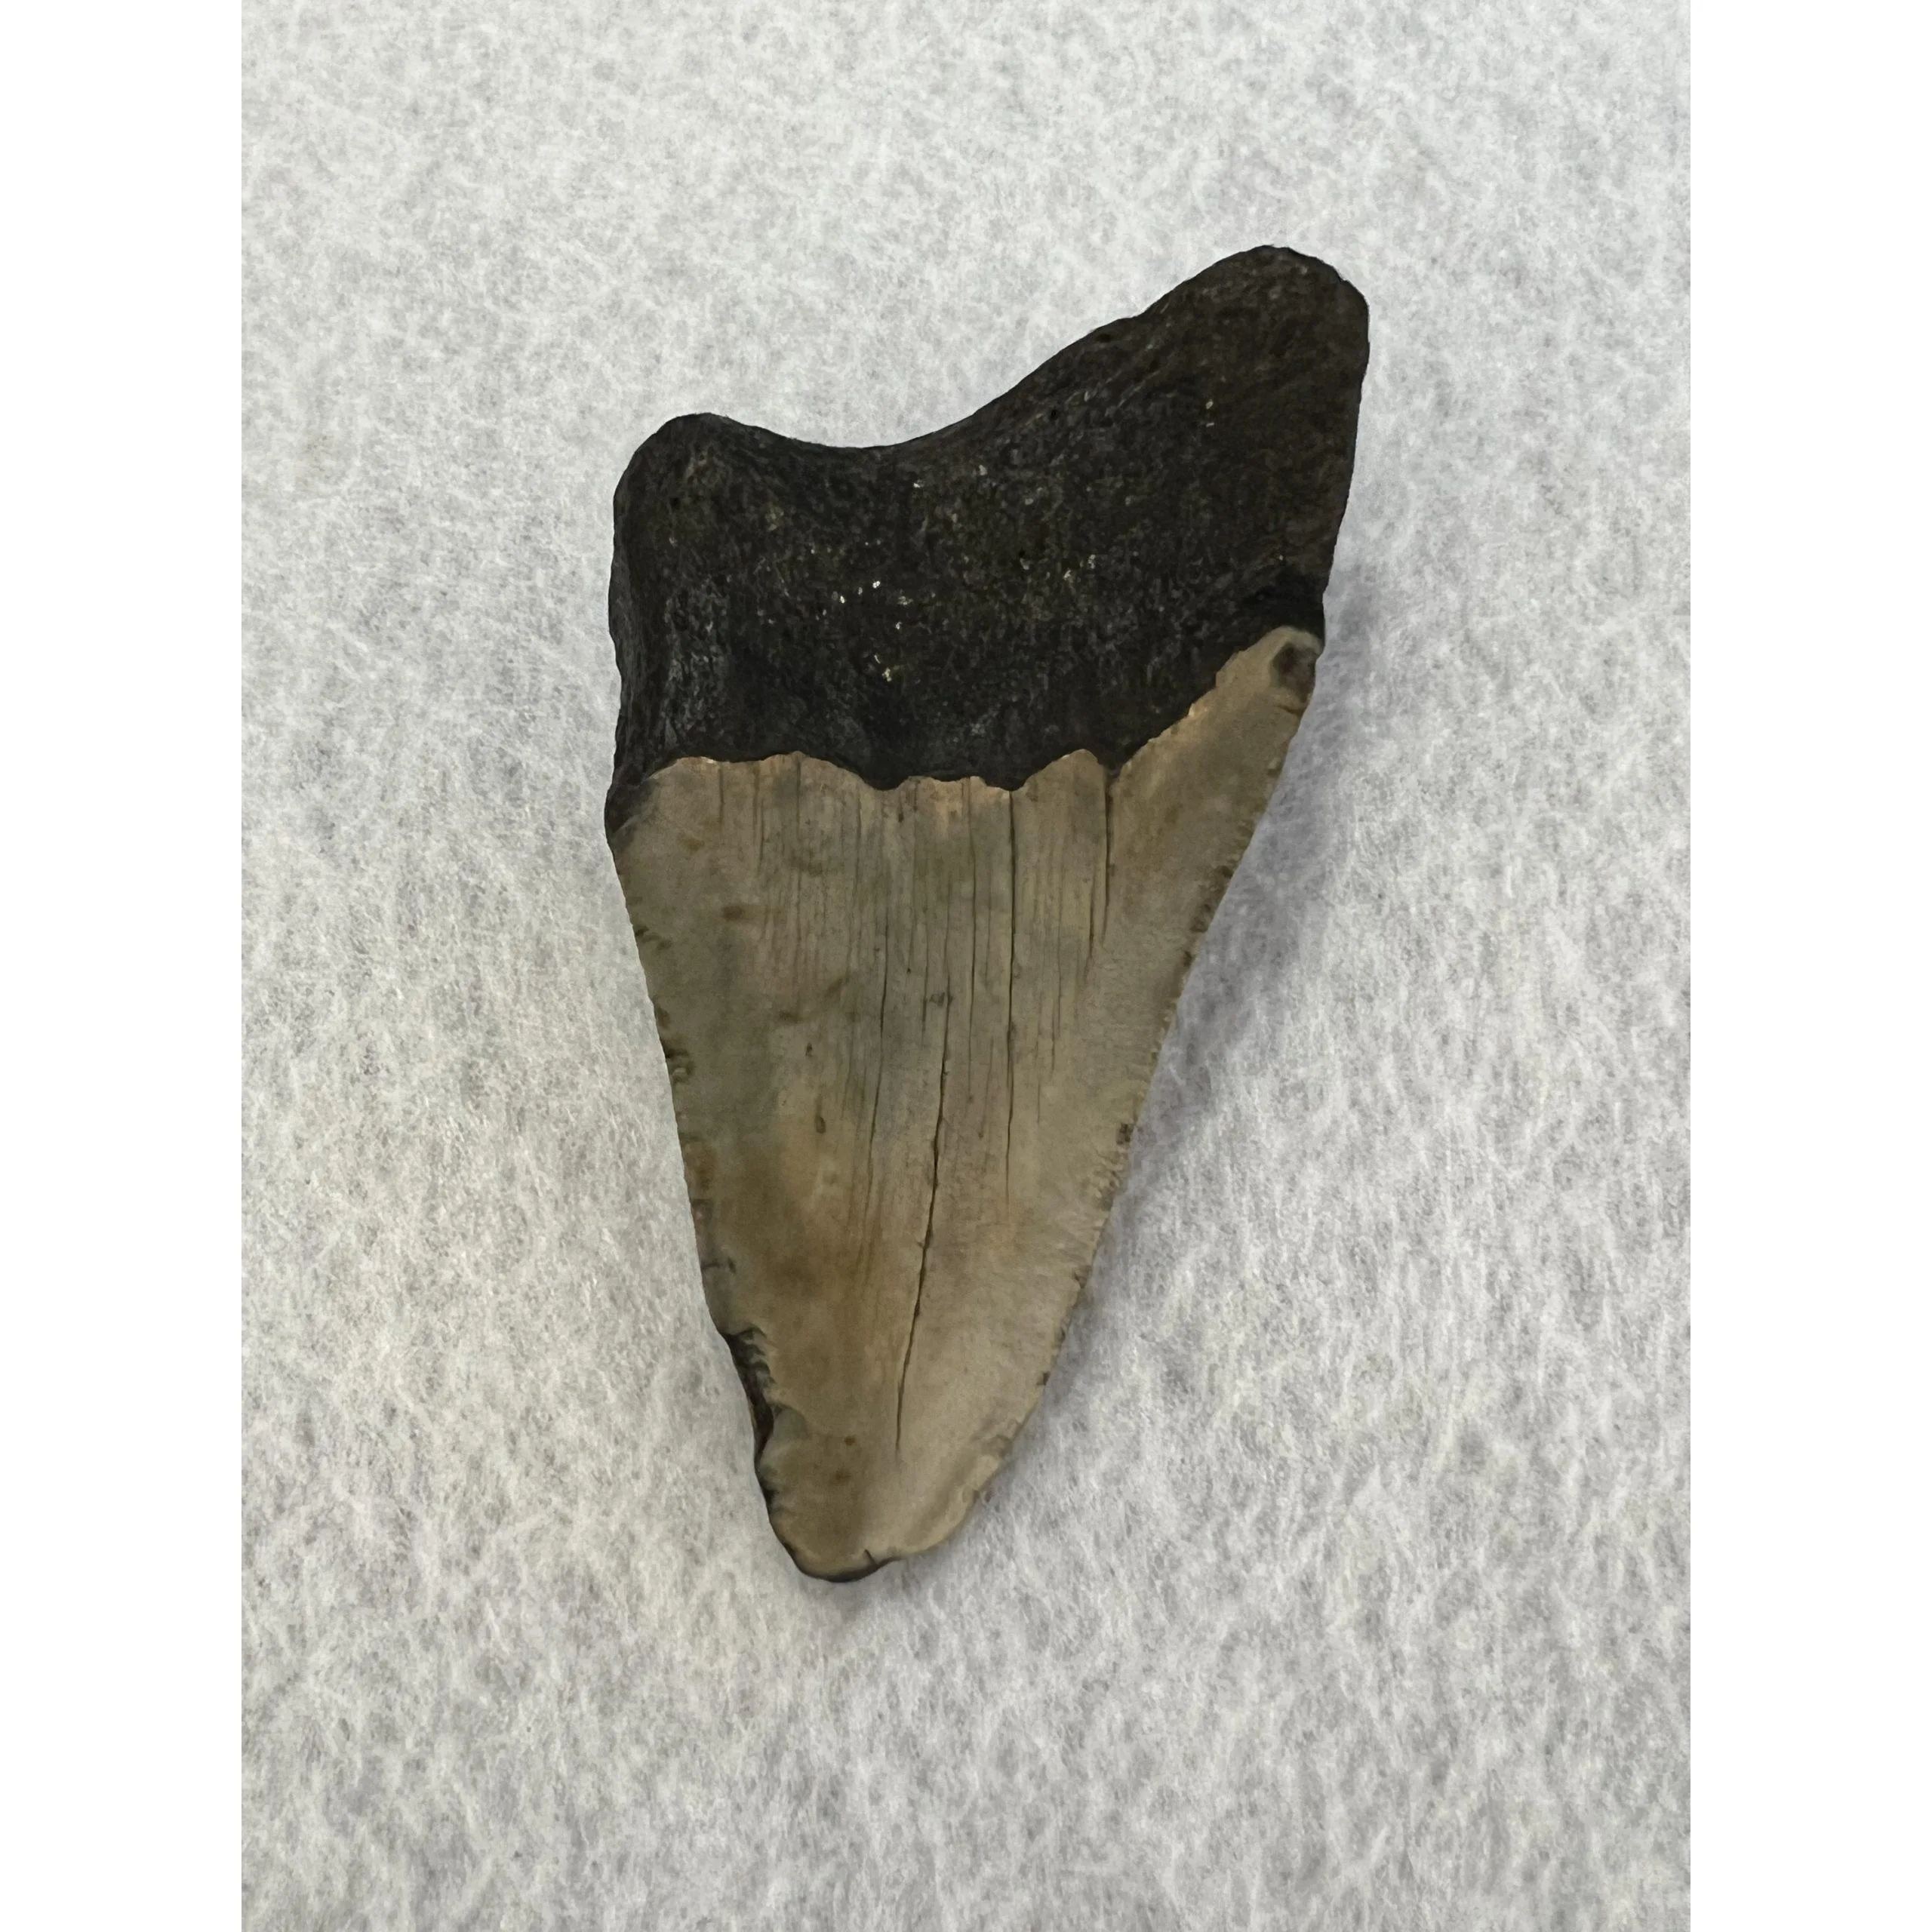 Megalodon Partial Tooth,  South Carolina 4.15 inch Prehistoric Online